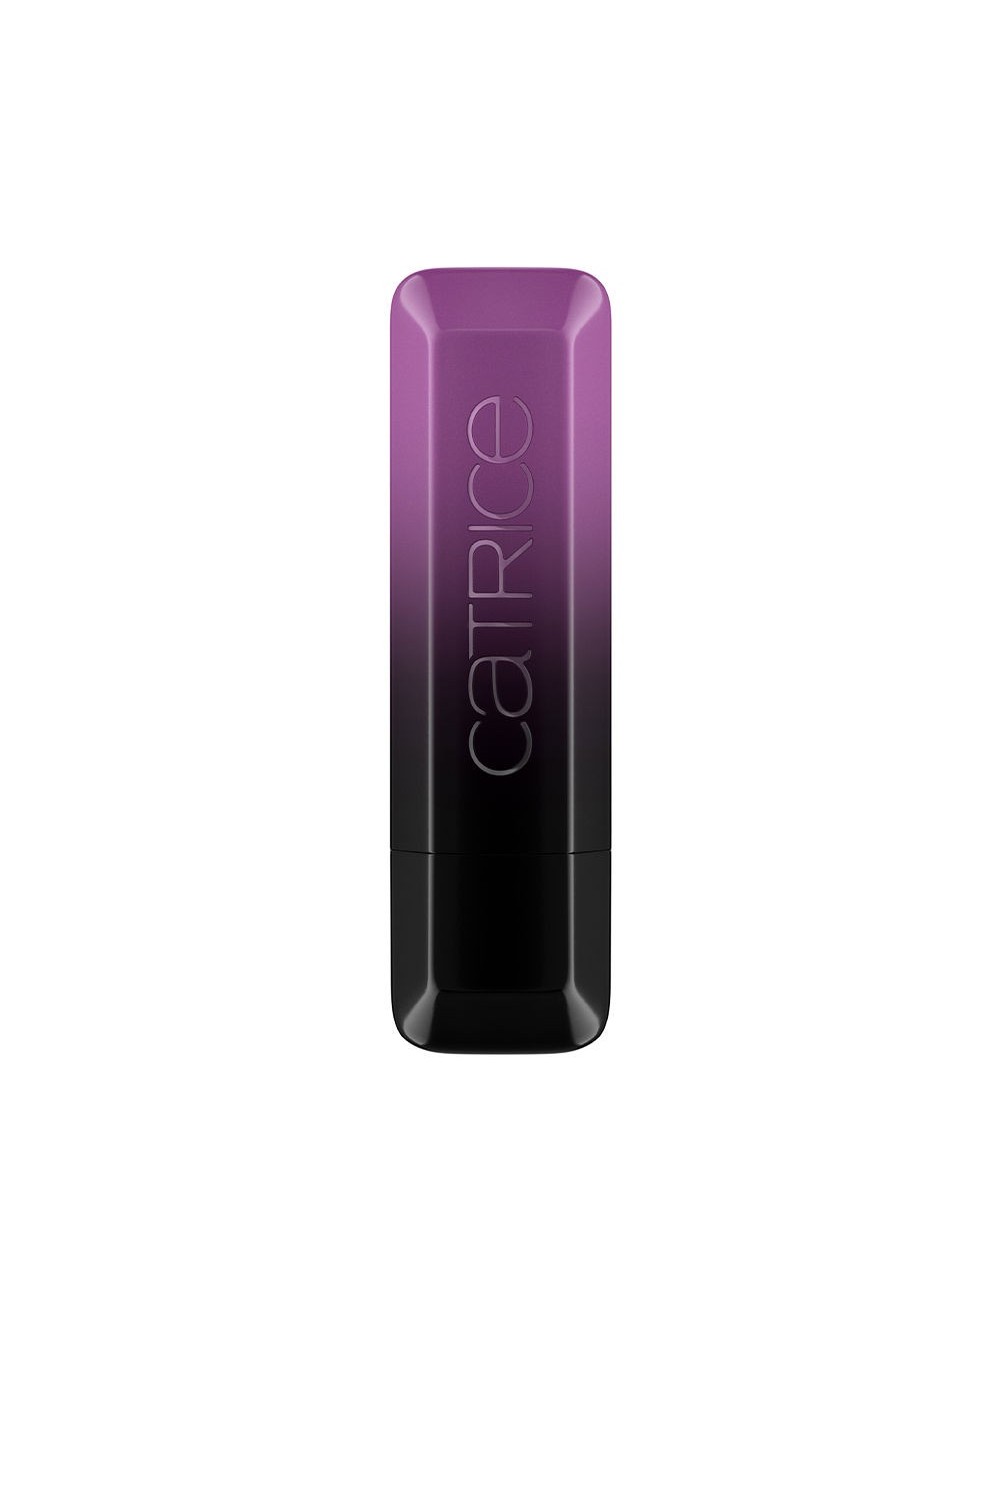 Catrice Shine Bomb Lipstick 090-Queen Of Hearts 3,5g